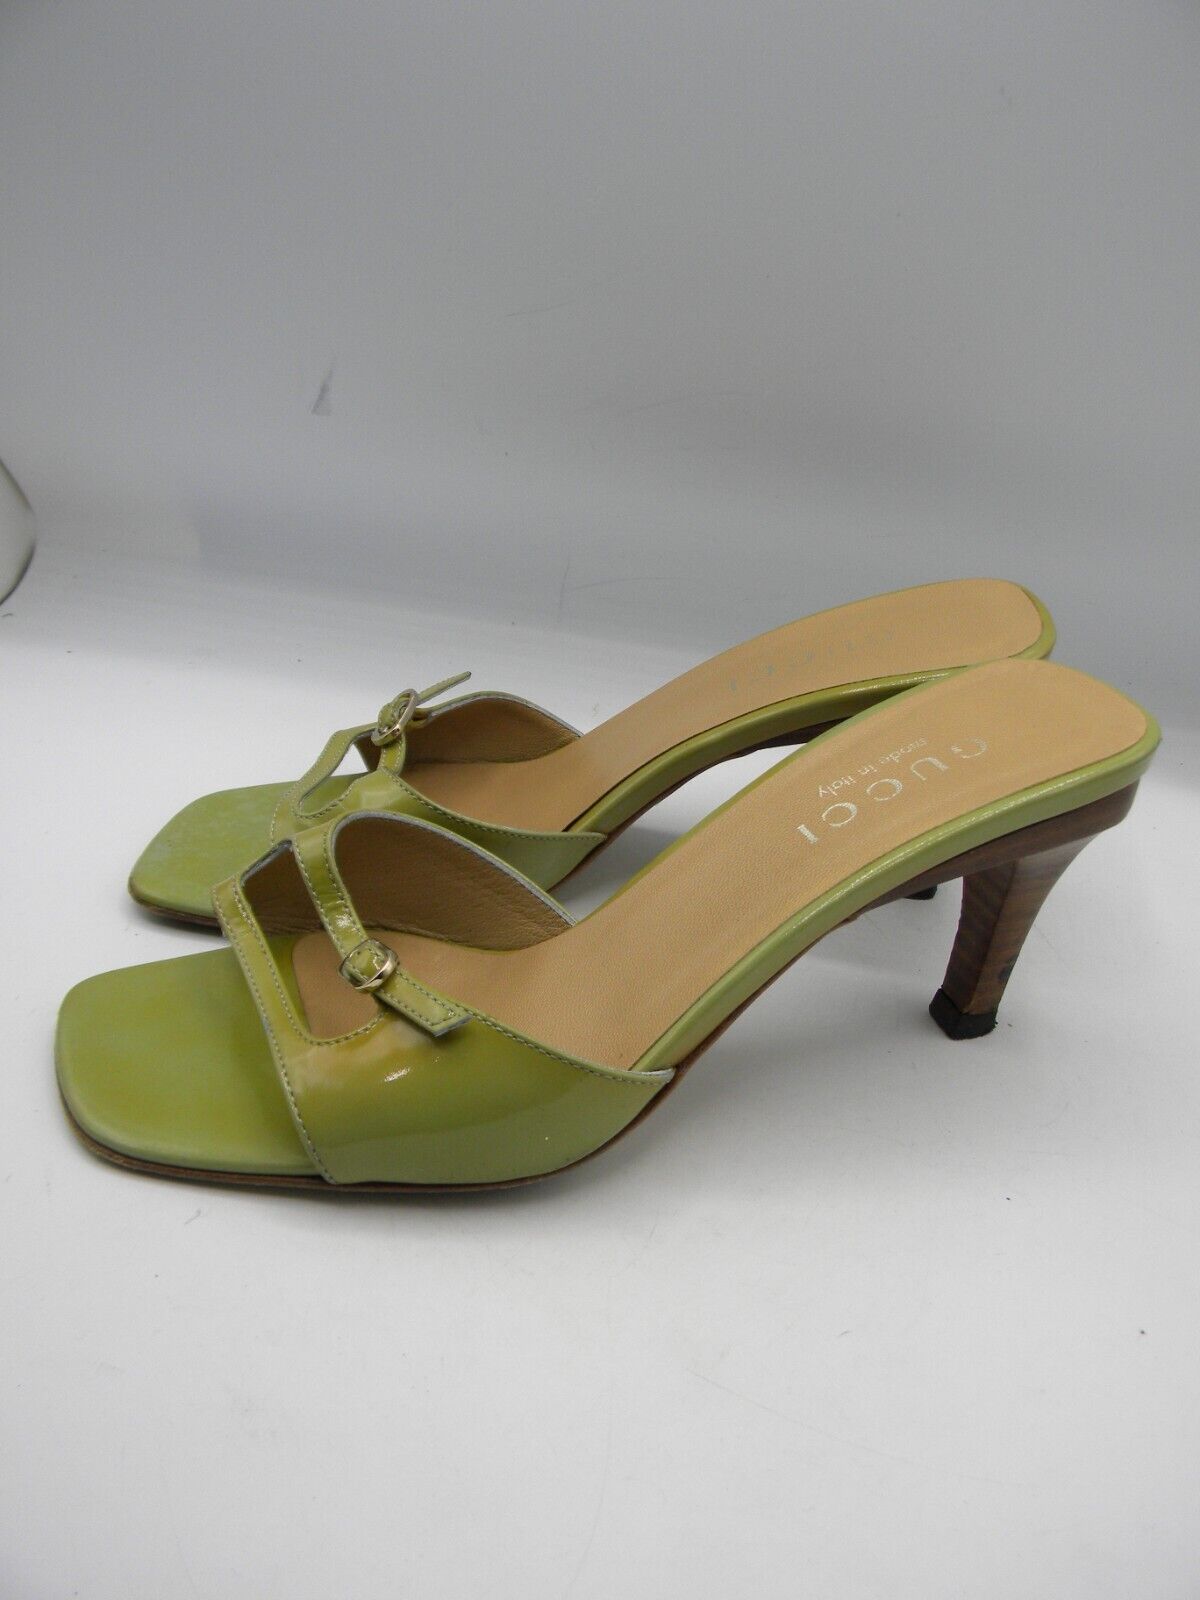 GUCCI Green Patent Leather High Heel Slides Sandals Size | eBay